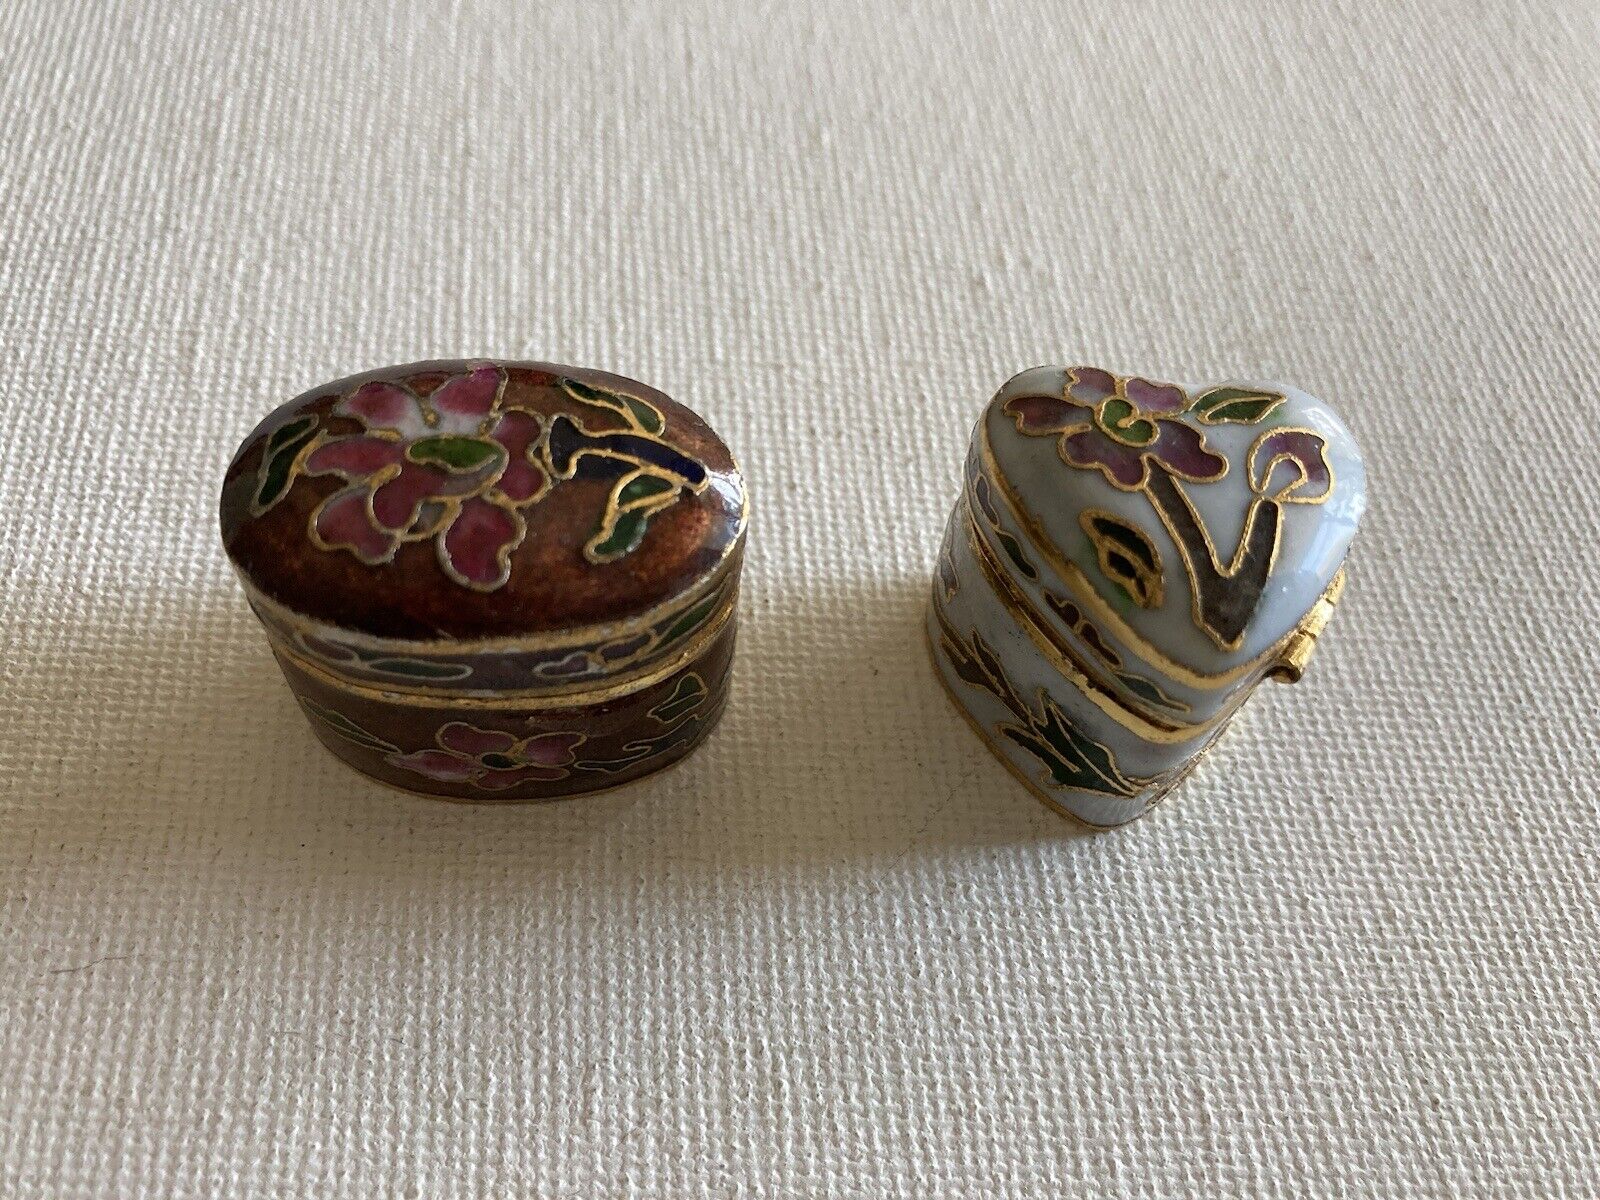 A SET OF 2 ENAMEL CLOISONNE MINIATURE PILL BOXES. TRINKETS/JEWELRY/COLLECTIBLES.